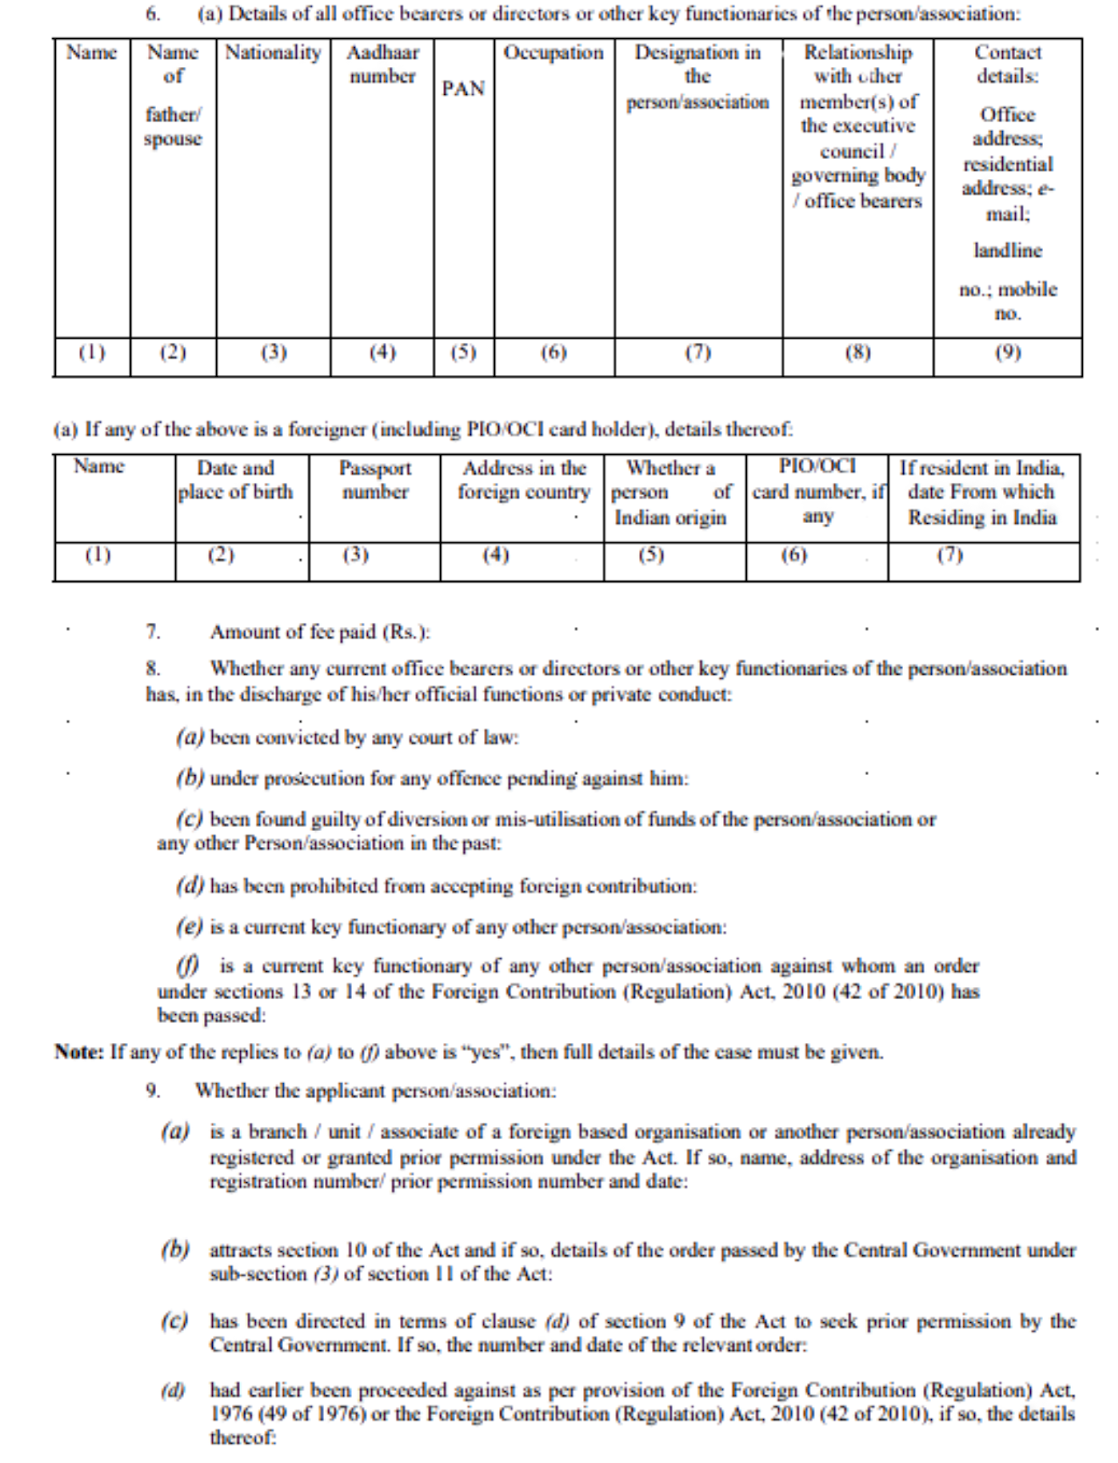 Sample Form of FC- 3A Application to be filled